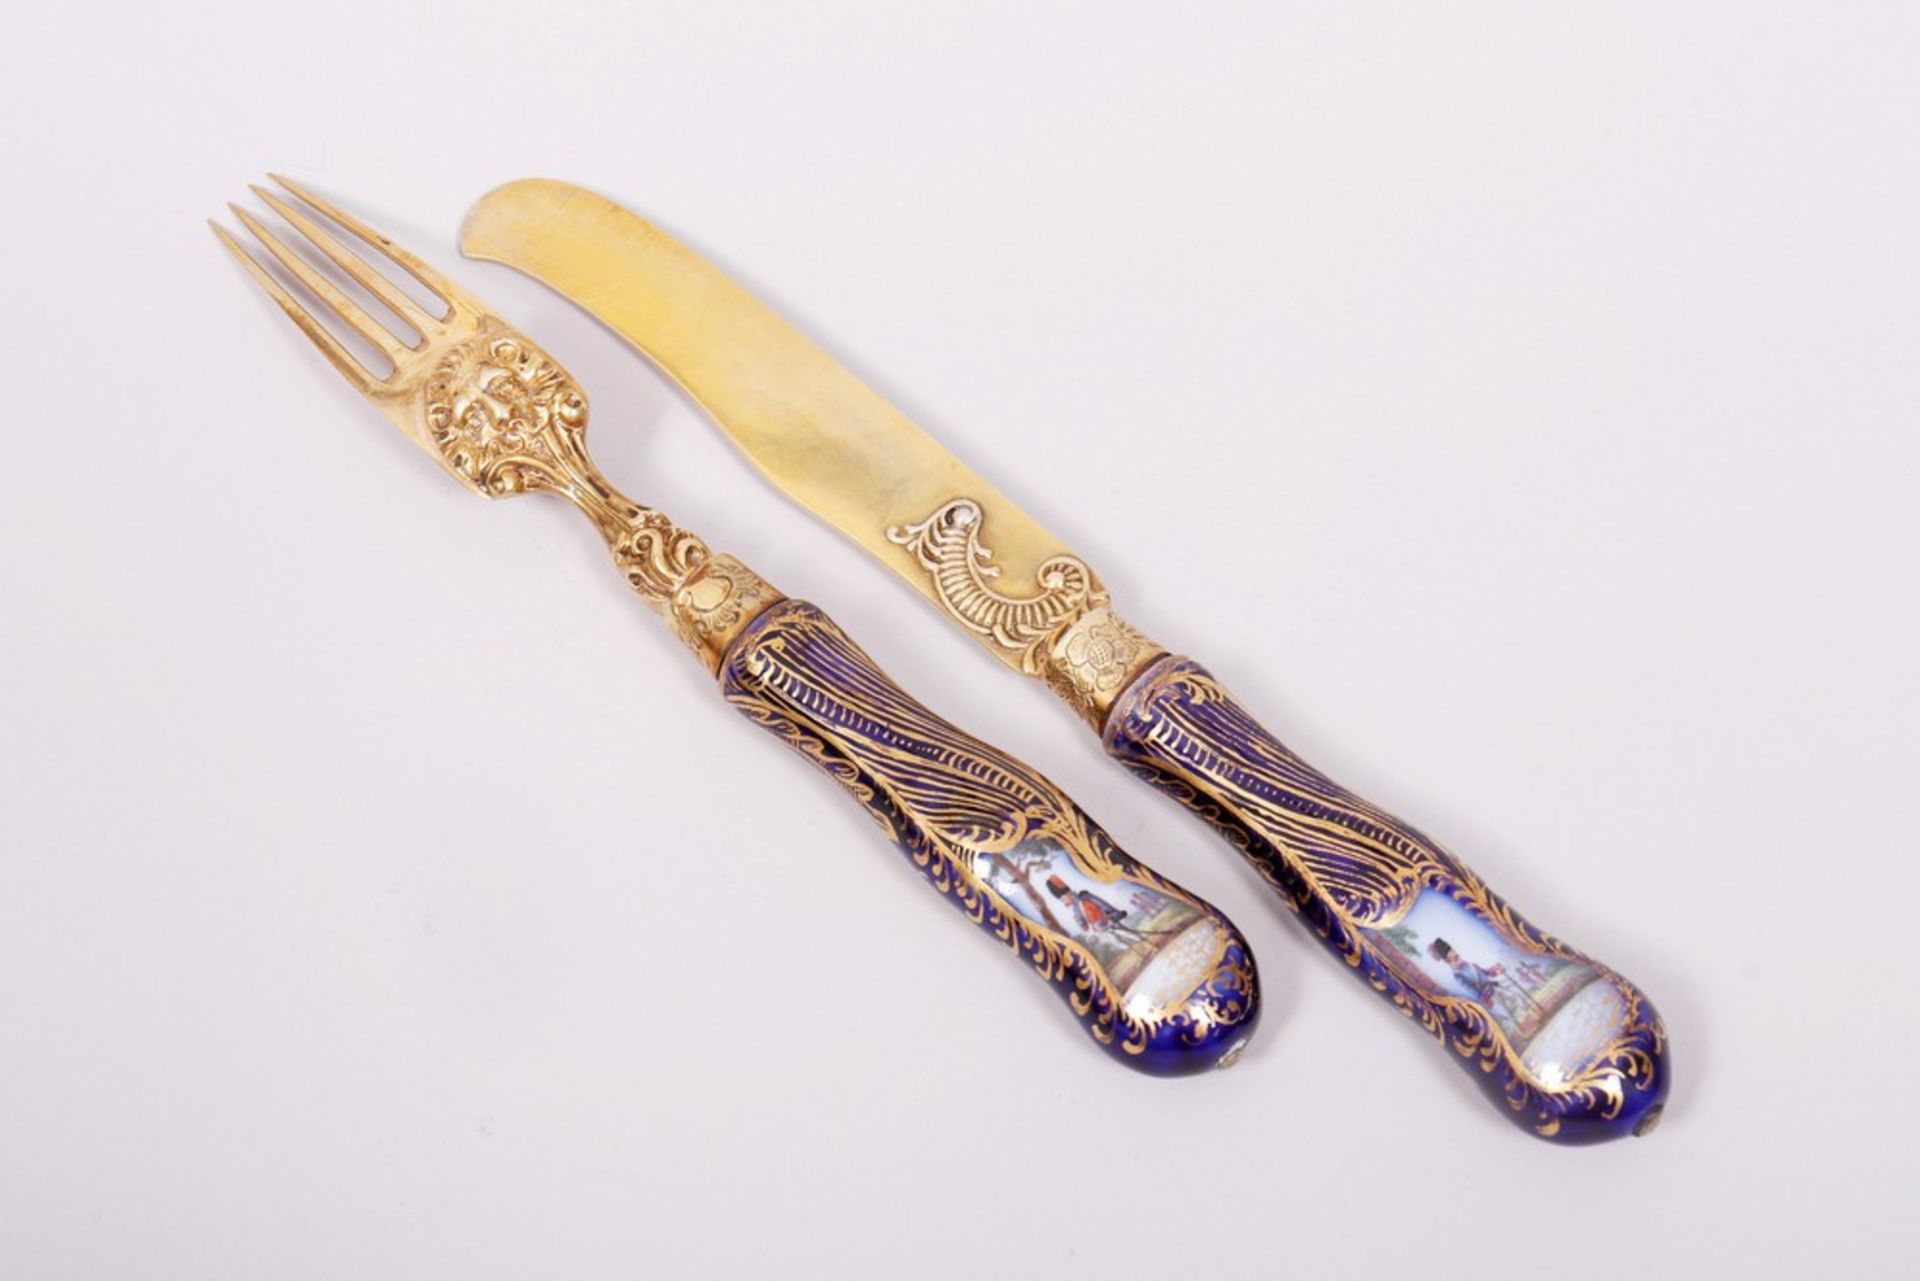 Late Baroque dining knife and fork, silver/gilt, probably German, mid-18th C. - Image 4 of 5